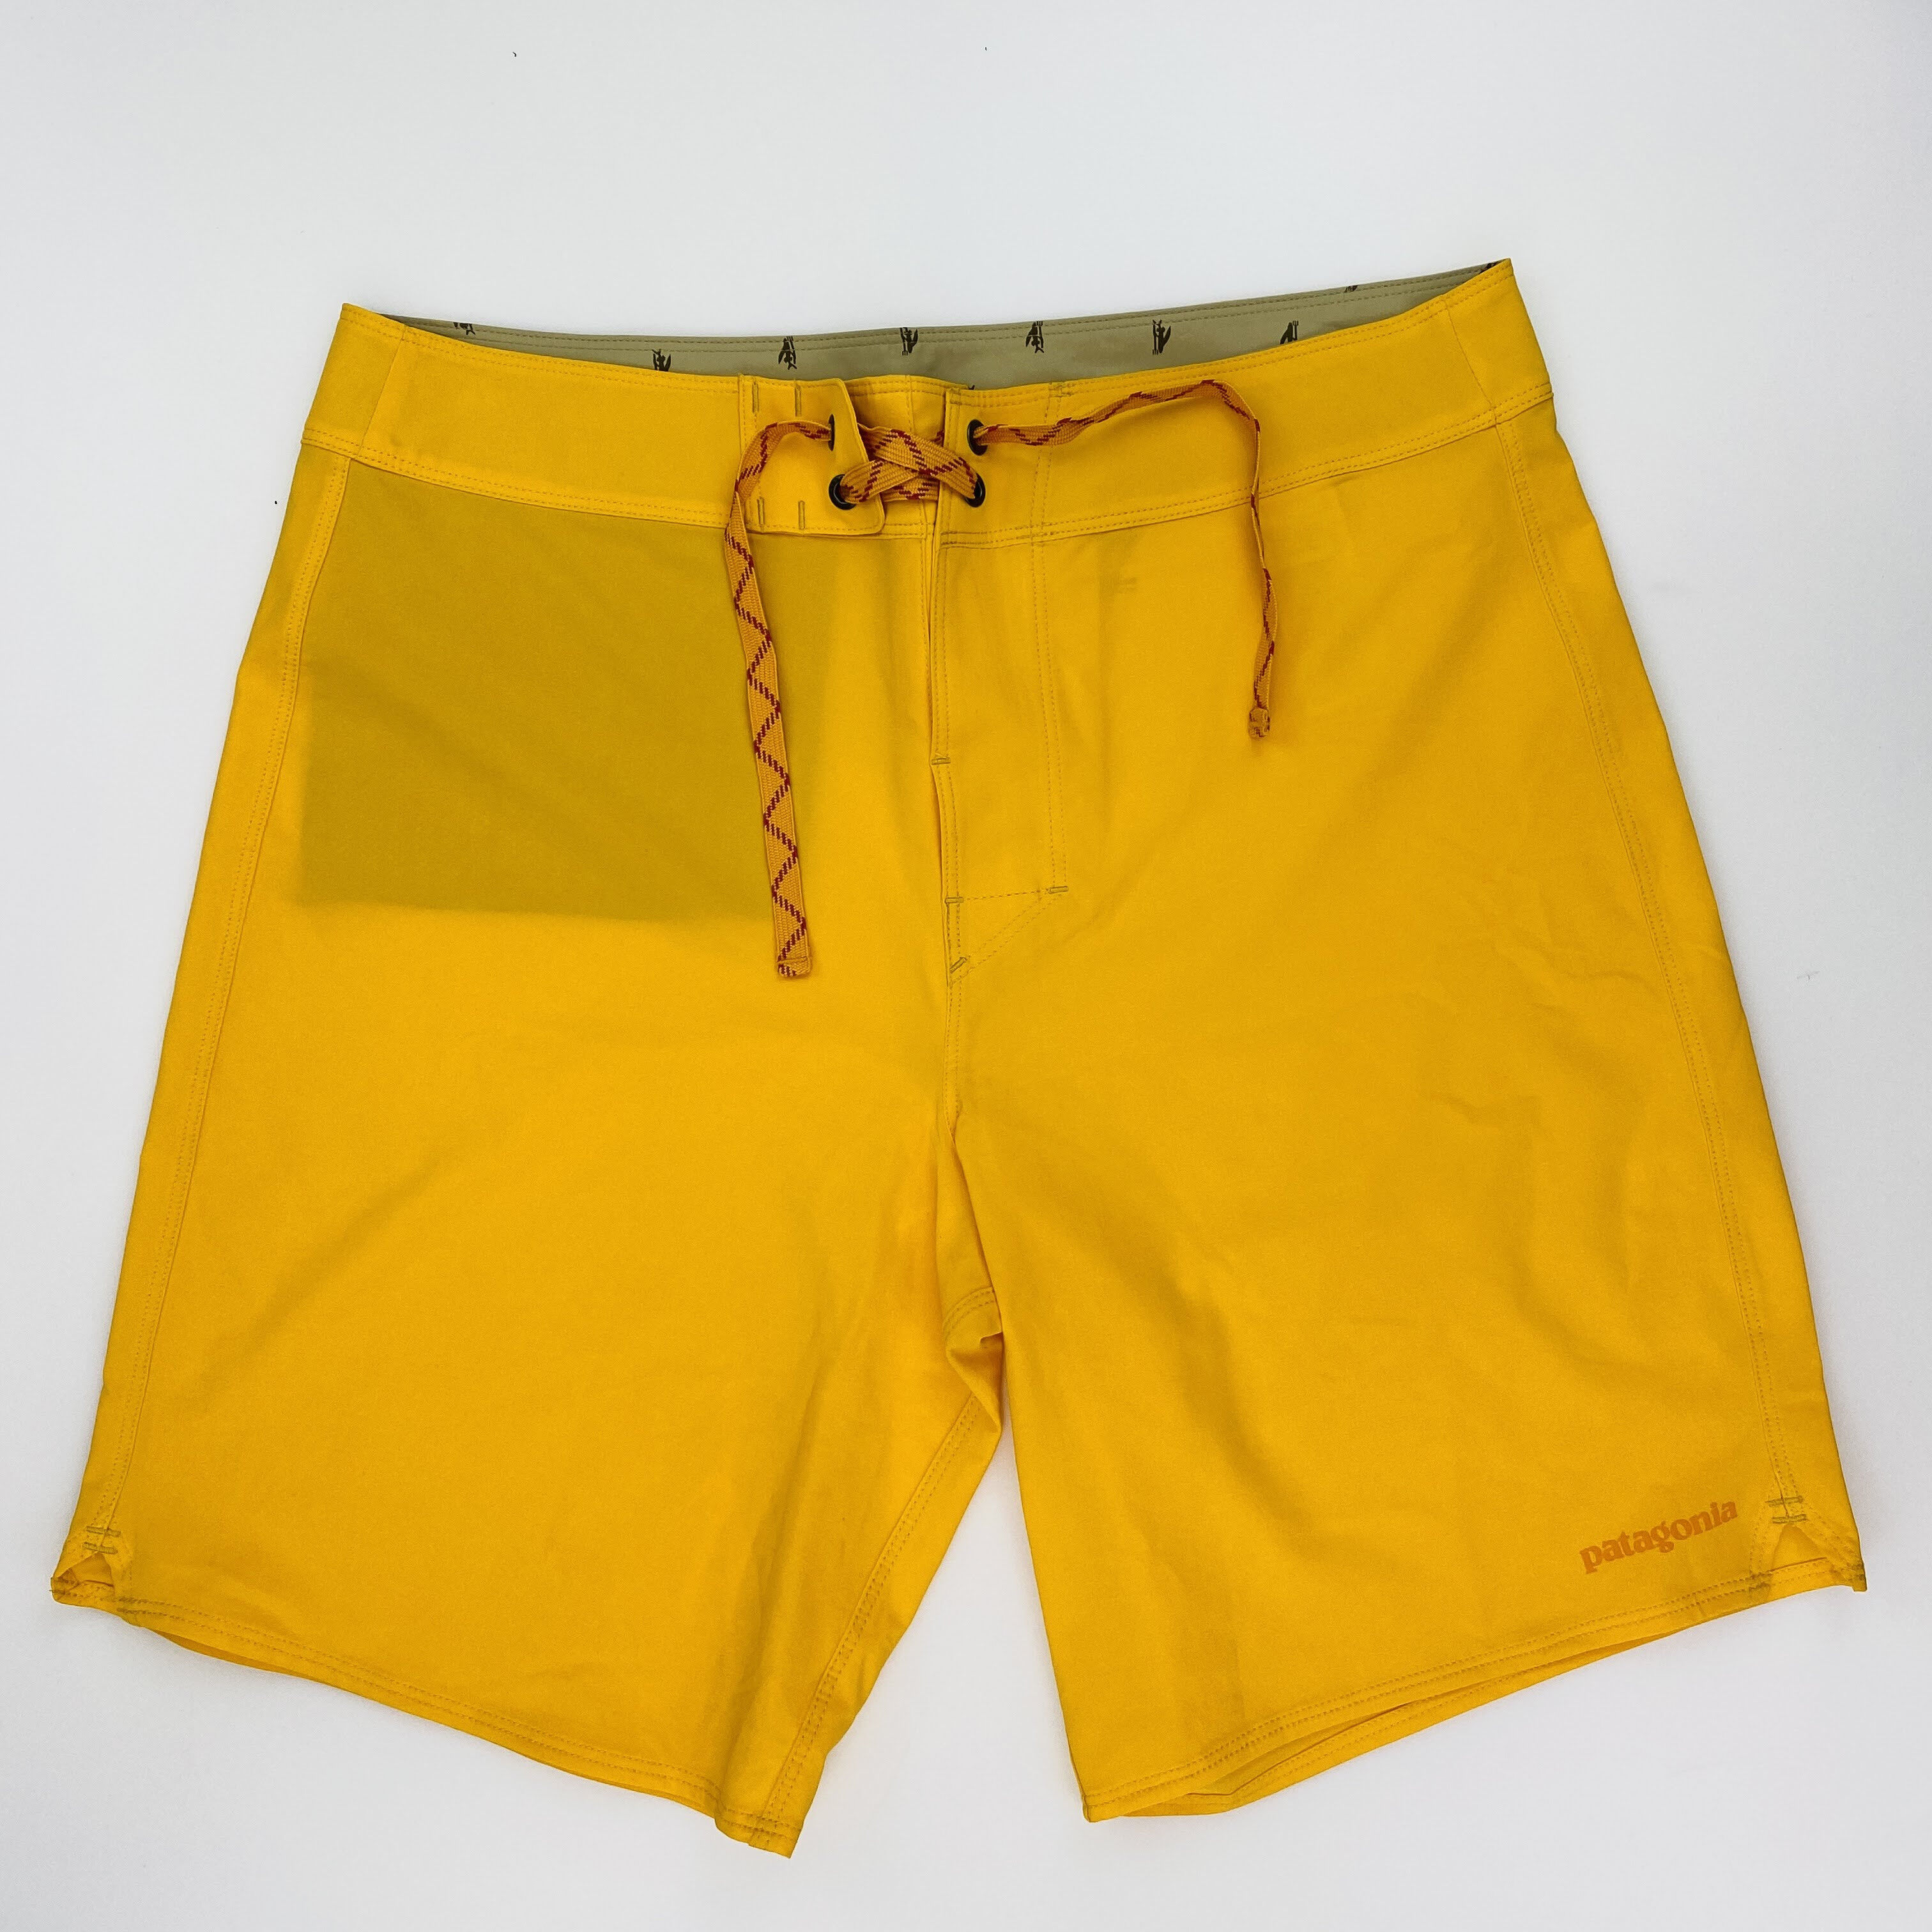 Patagonia M's Stretch Hydropeak Boardshorts - 18 in. - Second Hand Shorts - Men's - Yellow - 42 | Hardloop